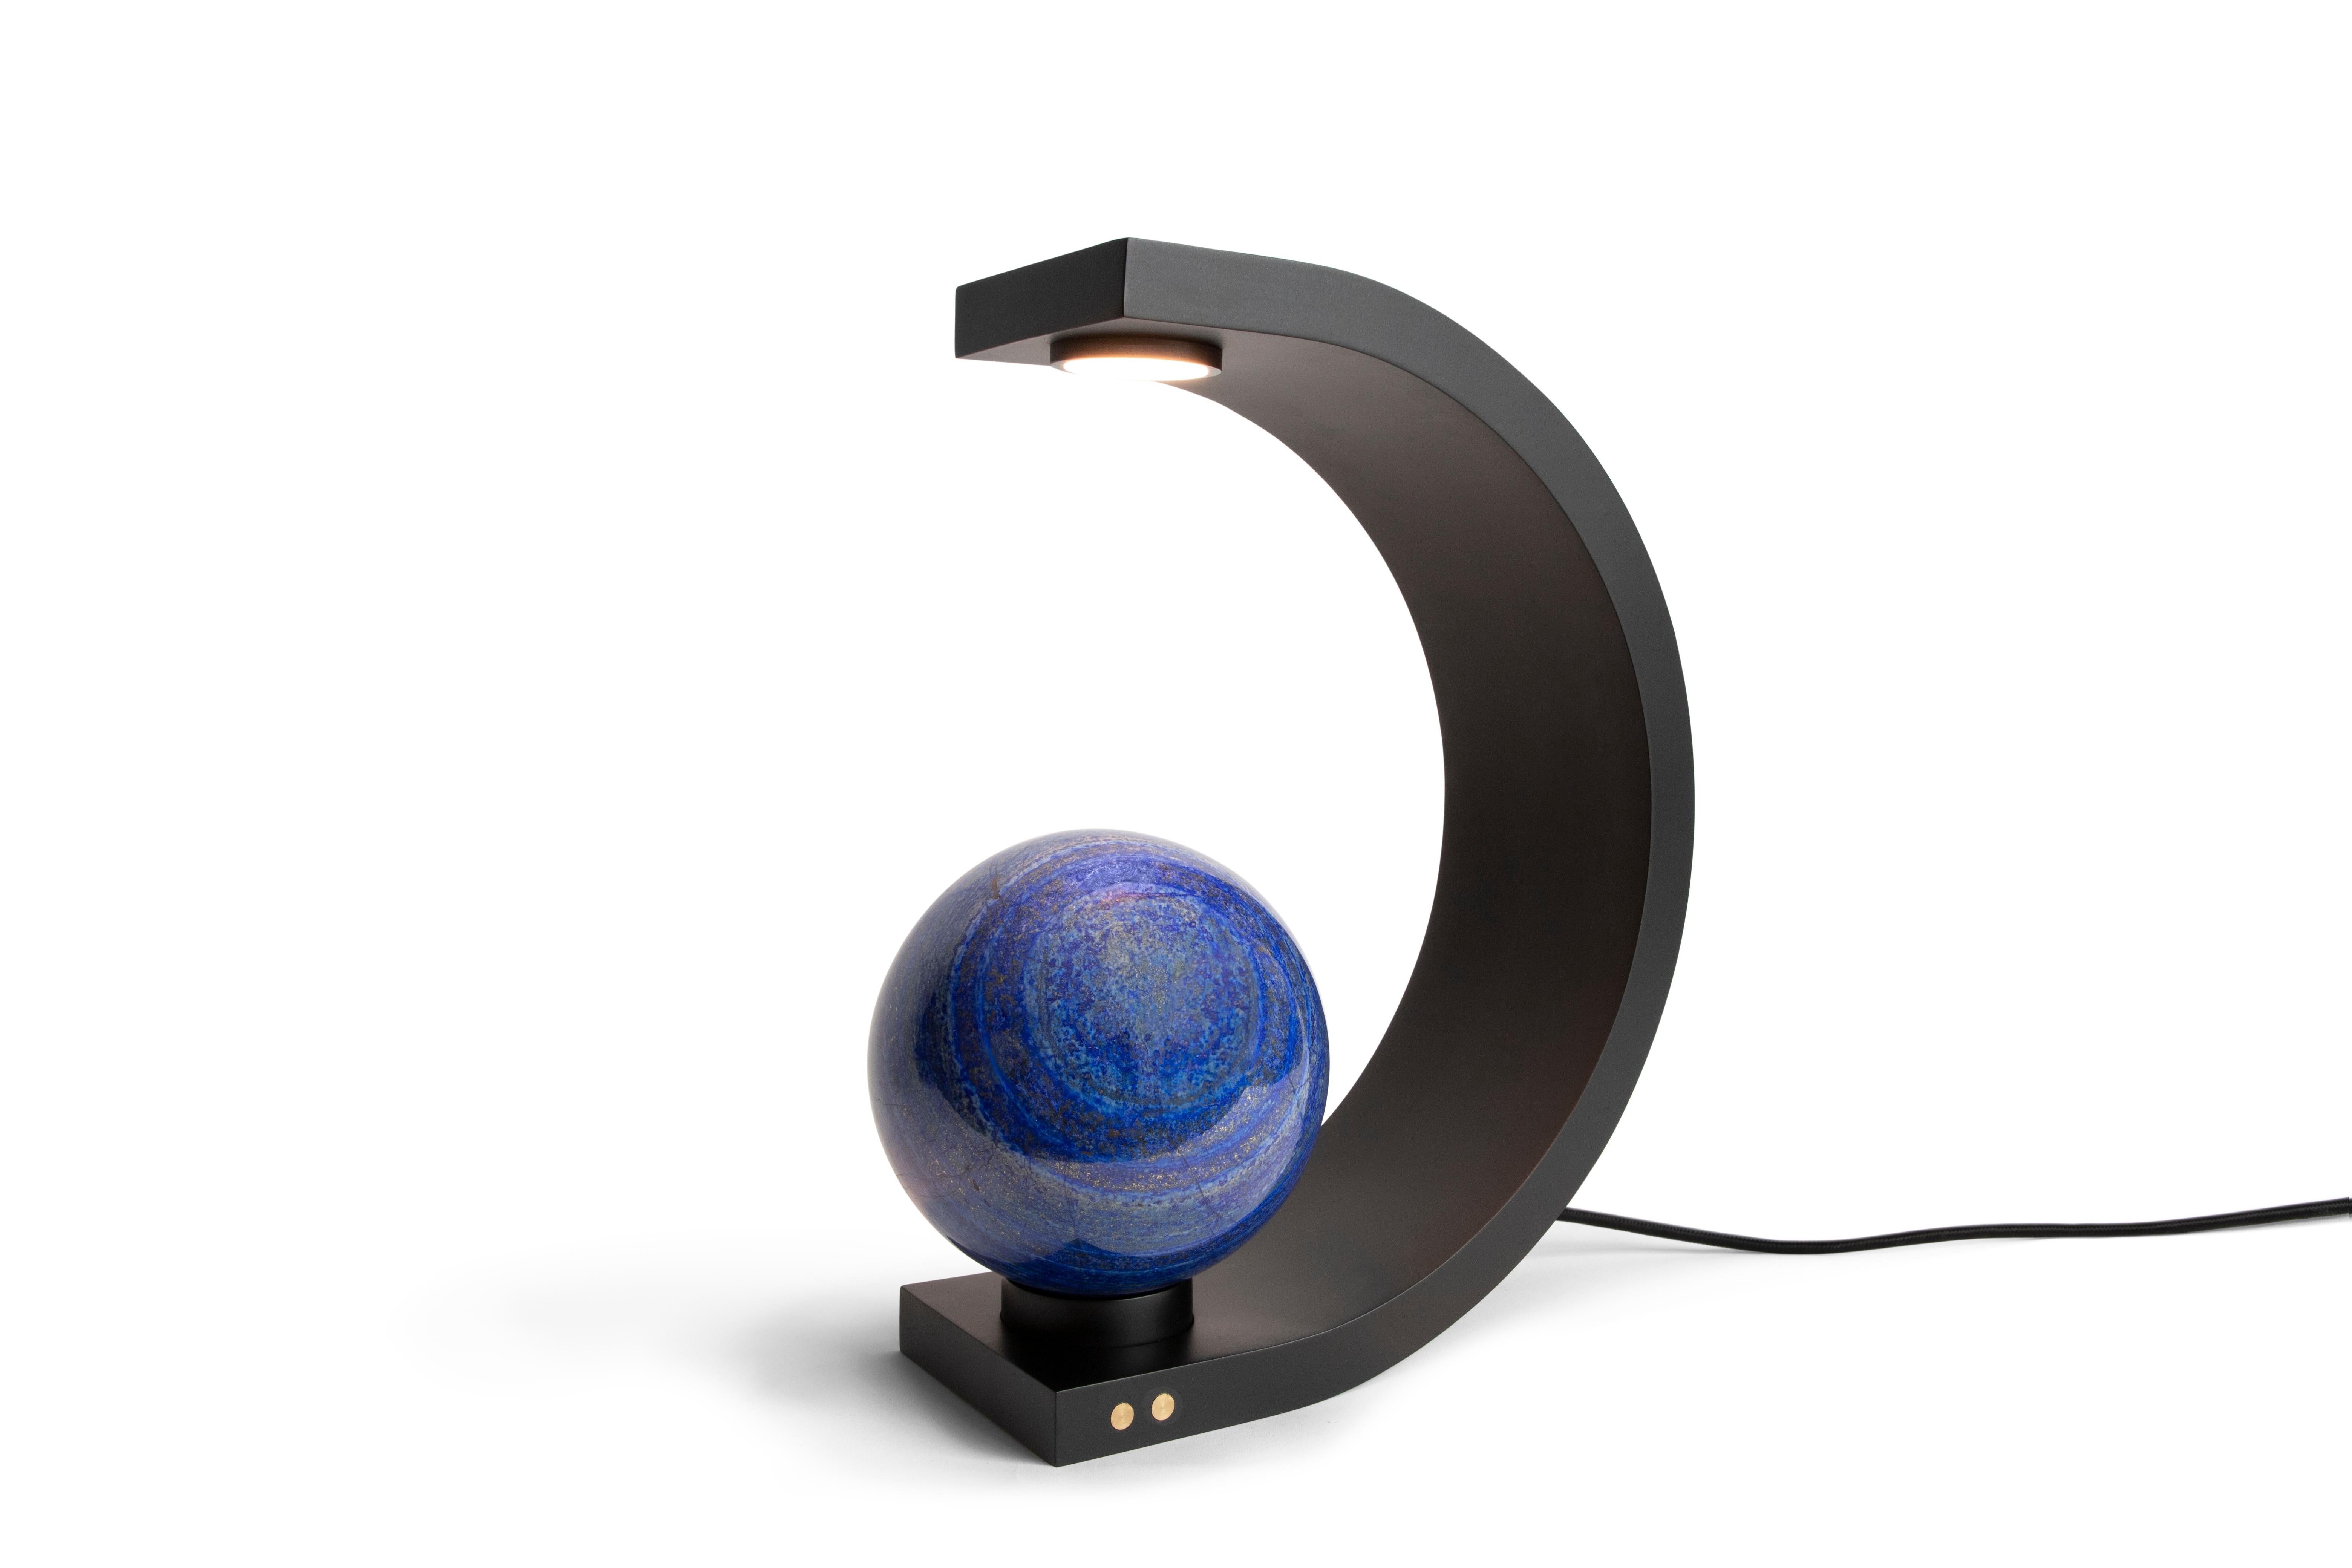 Organic Modern Hotai II Table Lamp by Sten Studio, Represented by Tuleste Factory For Sale